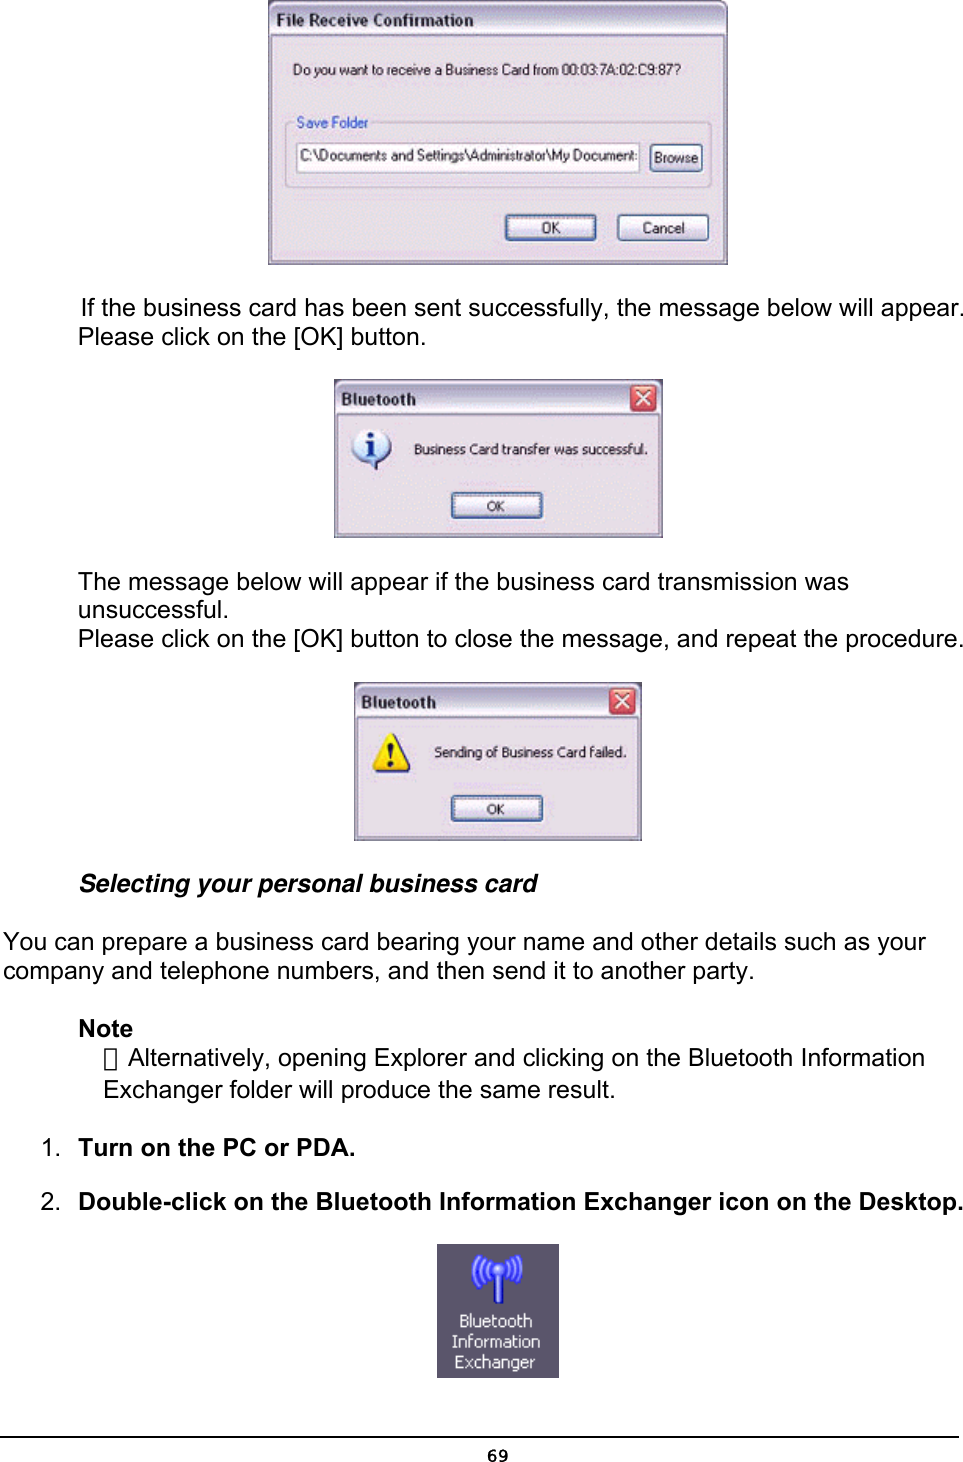   If the business card has been sent successfully, the message below will appear. Please click on the [OK] button.  The message below will appear if the business card transmission was unsuccessful. Please click on the [OK] button to close the message, and repeat the procedure.  Selecting your personal business card You can prepare a business card bearing your name and other details such as your company and telephone numbers, and then send it to another party. Note ．Alternatively, opening Explorer and clicking on the Bluetooth Information Exchanger folder will produce the same result. 1.  Turn on the PC or PDA. 2.  Double-click on the Bluetooth Information Exchanger icon on the Desktop.   69